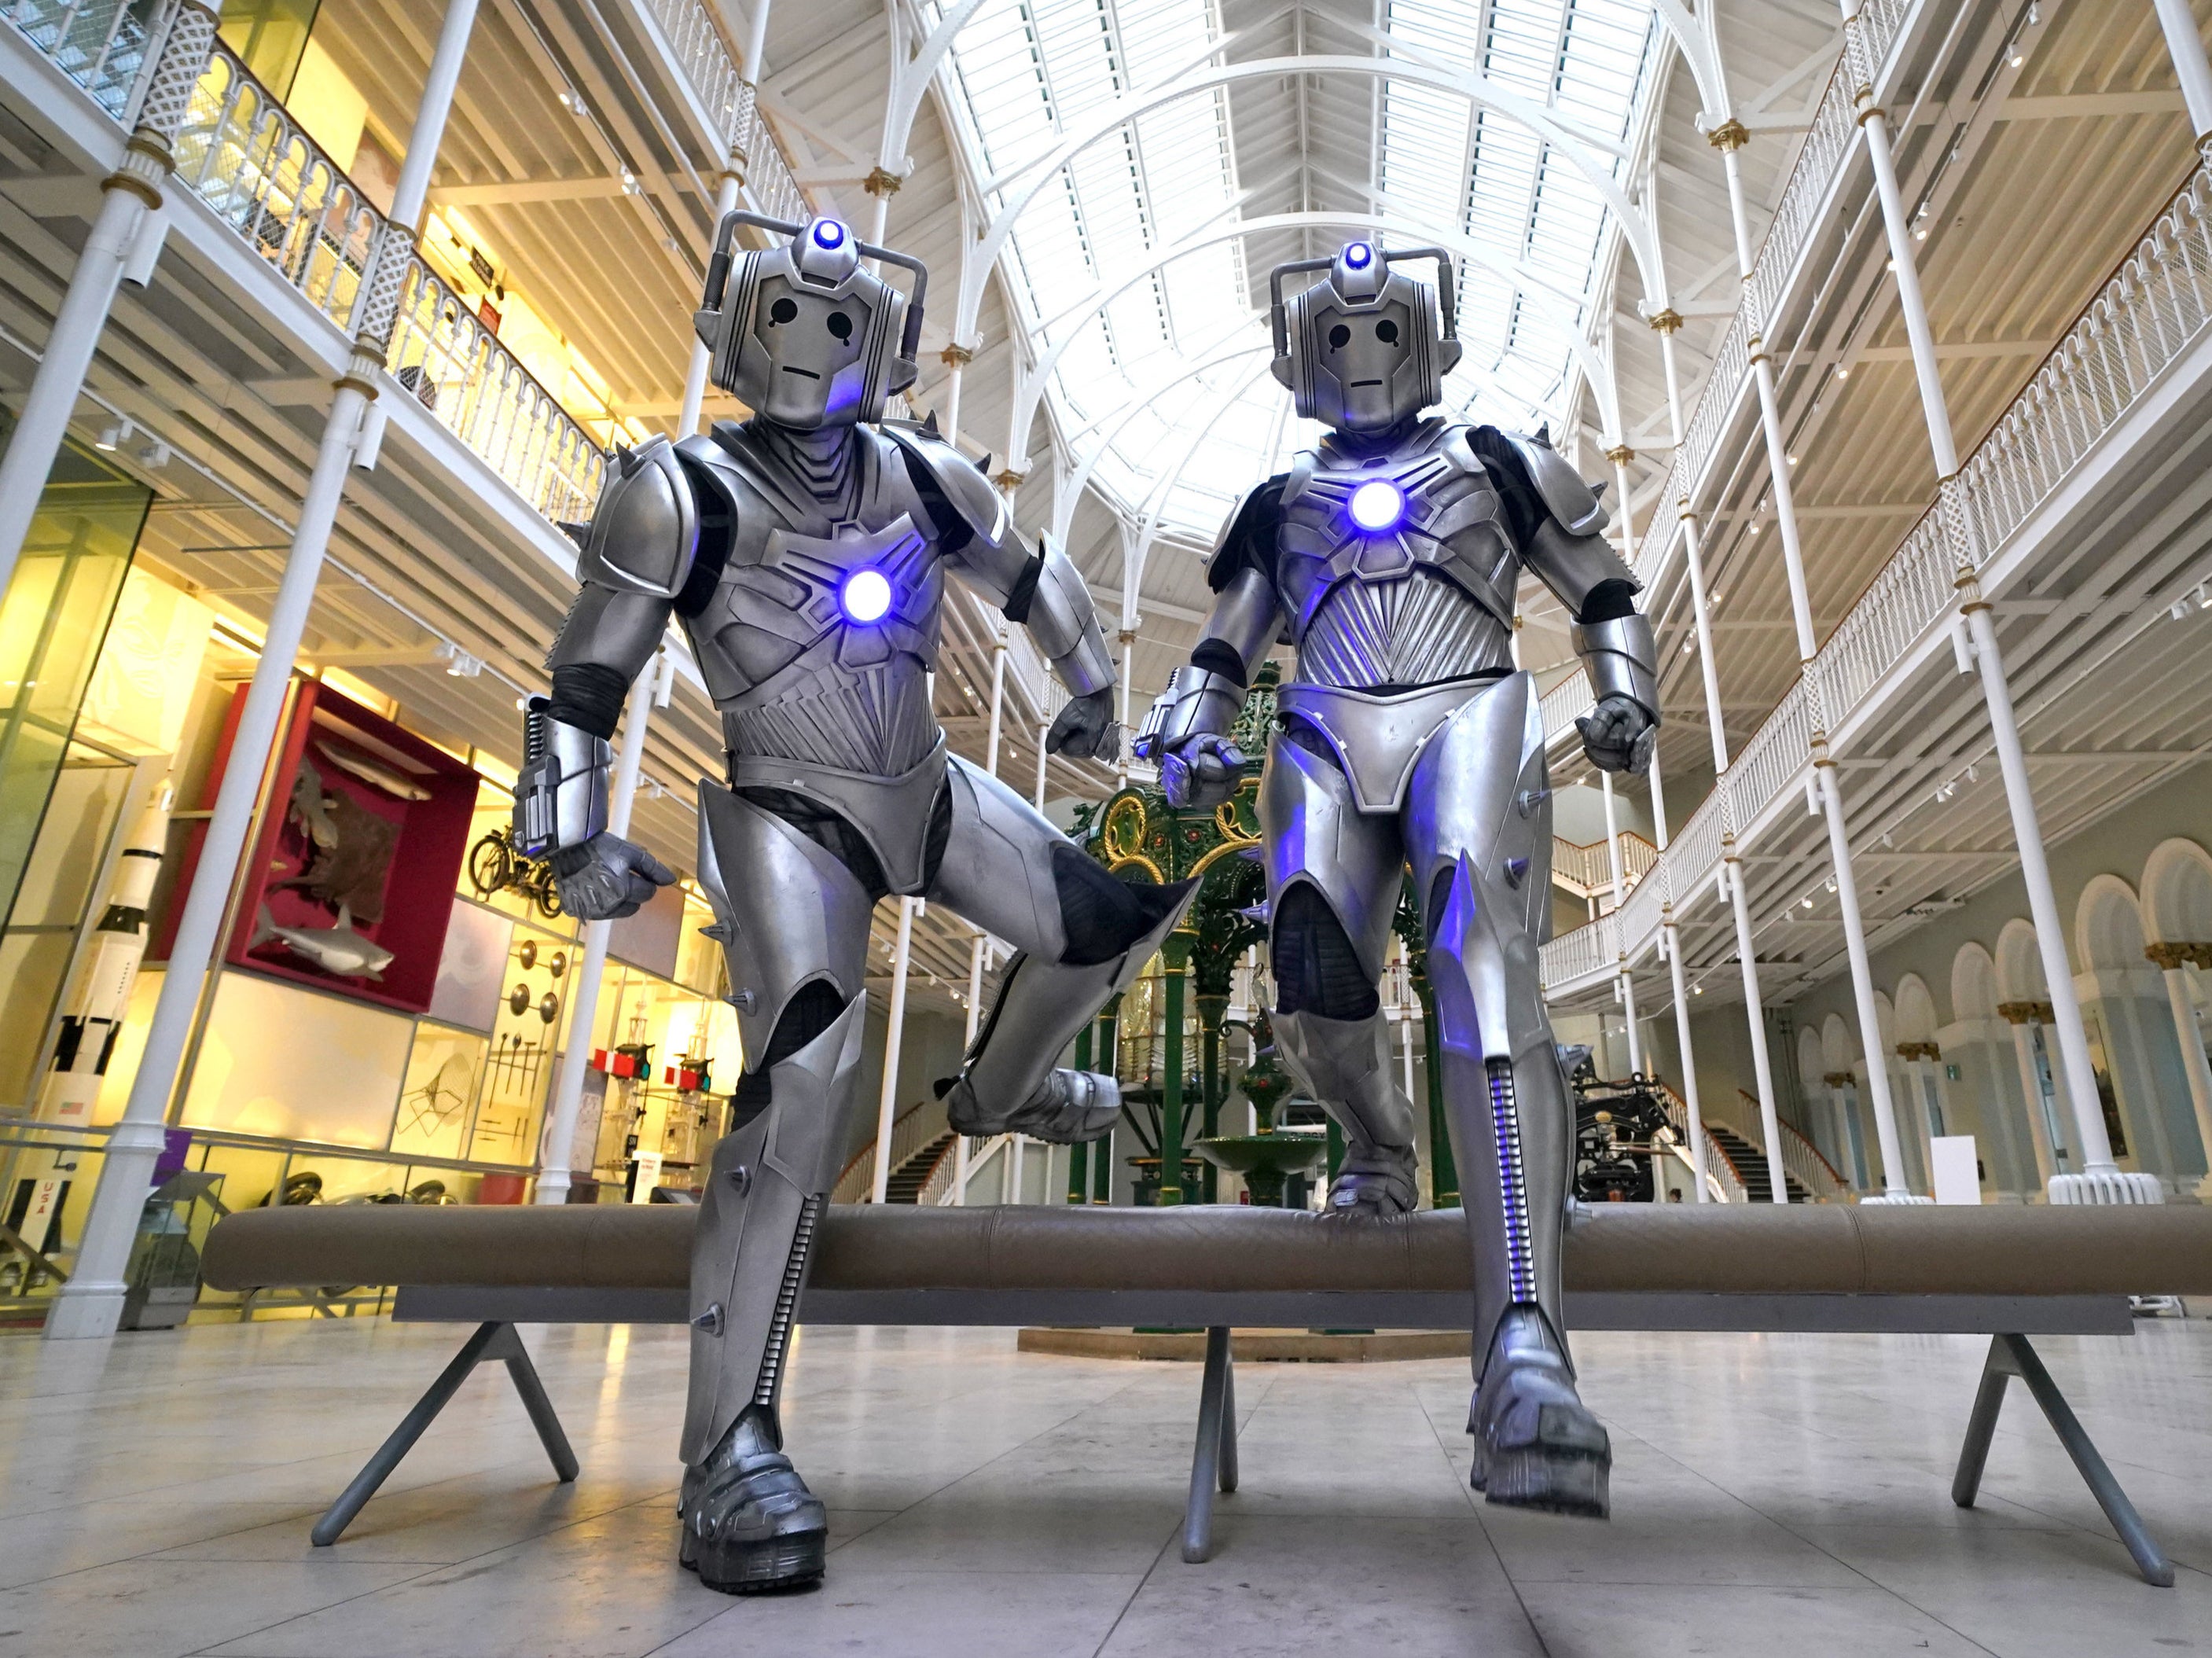 Cybermen at a preview for the Doctor Who Worlds of Wonder exhibition at National Museum Of Scotland in Edinburgh